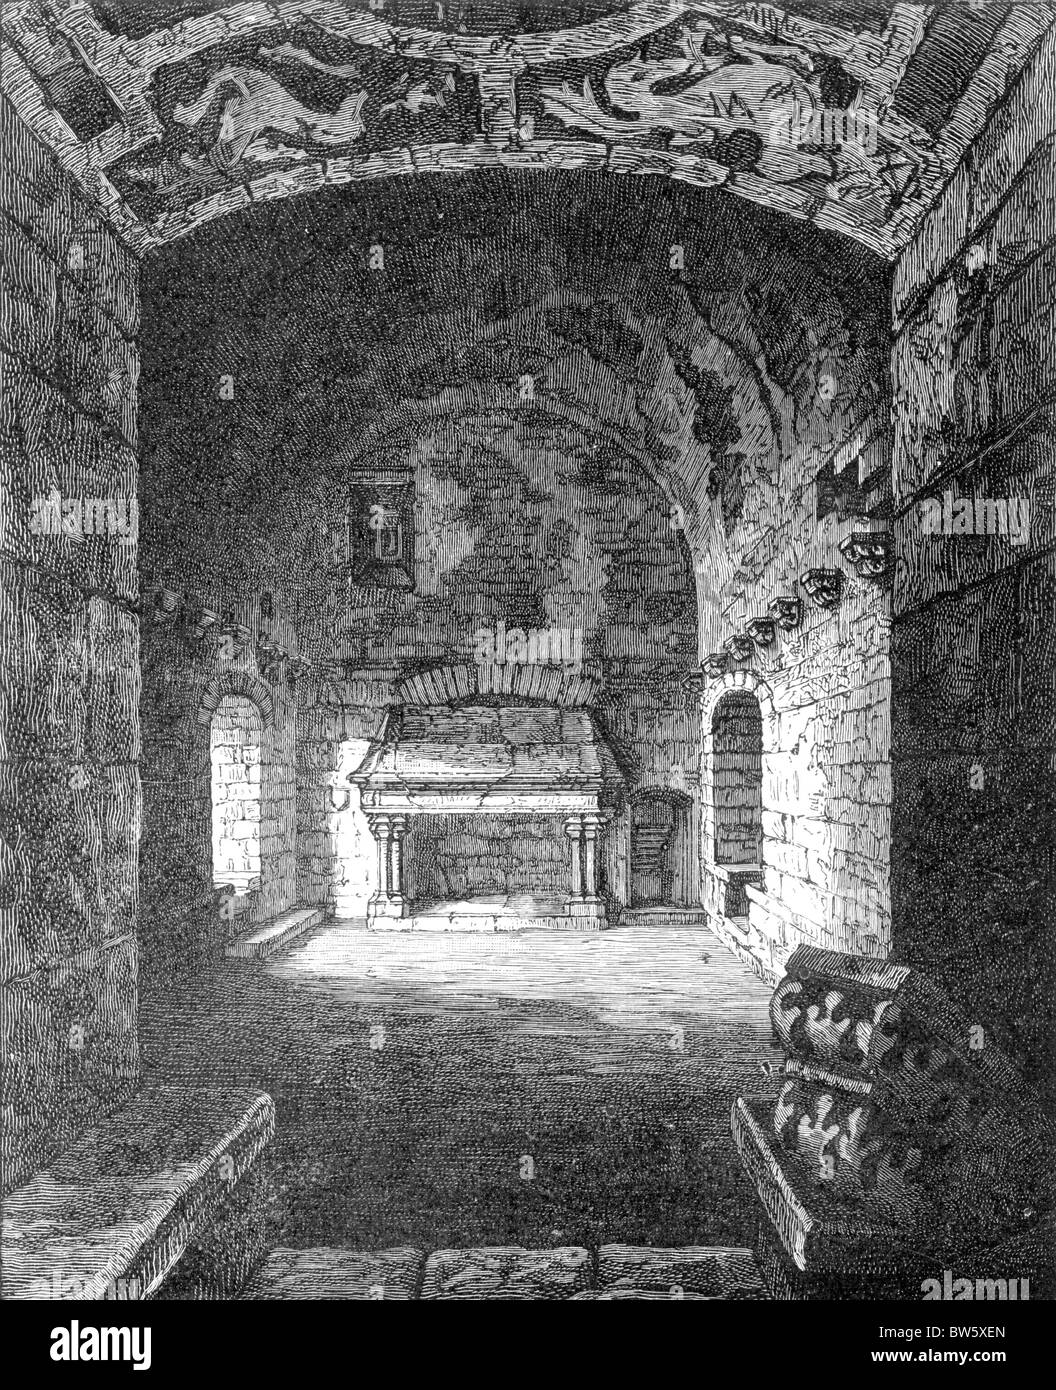 Room in the Keep of Craigmillar Castle, residence of Mary Stuart, Queen of Scots; Black and White Illustration; Stock Photo